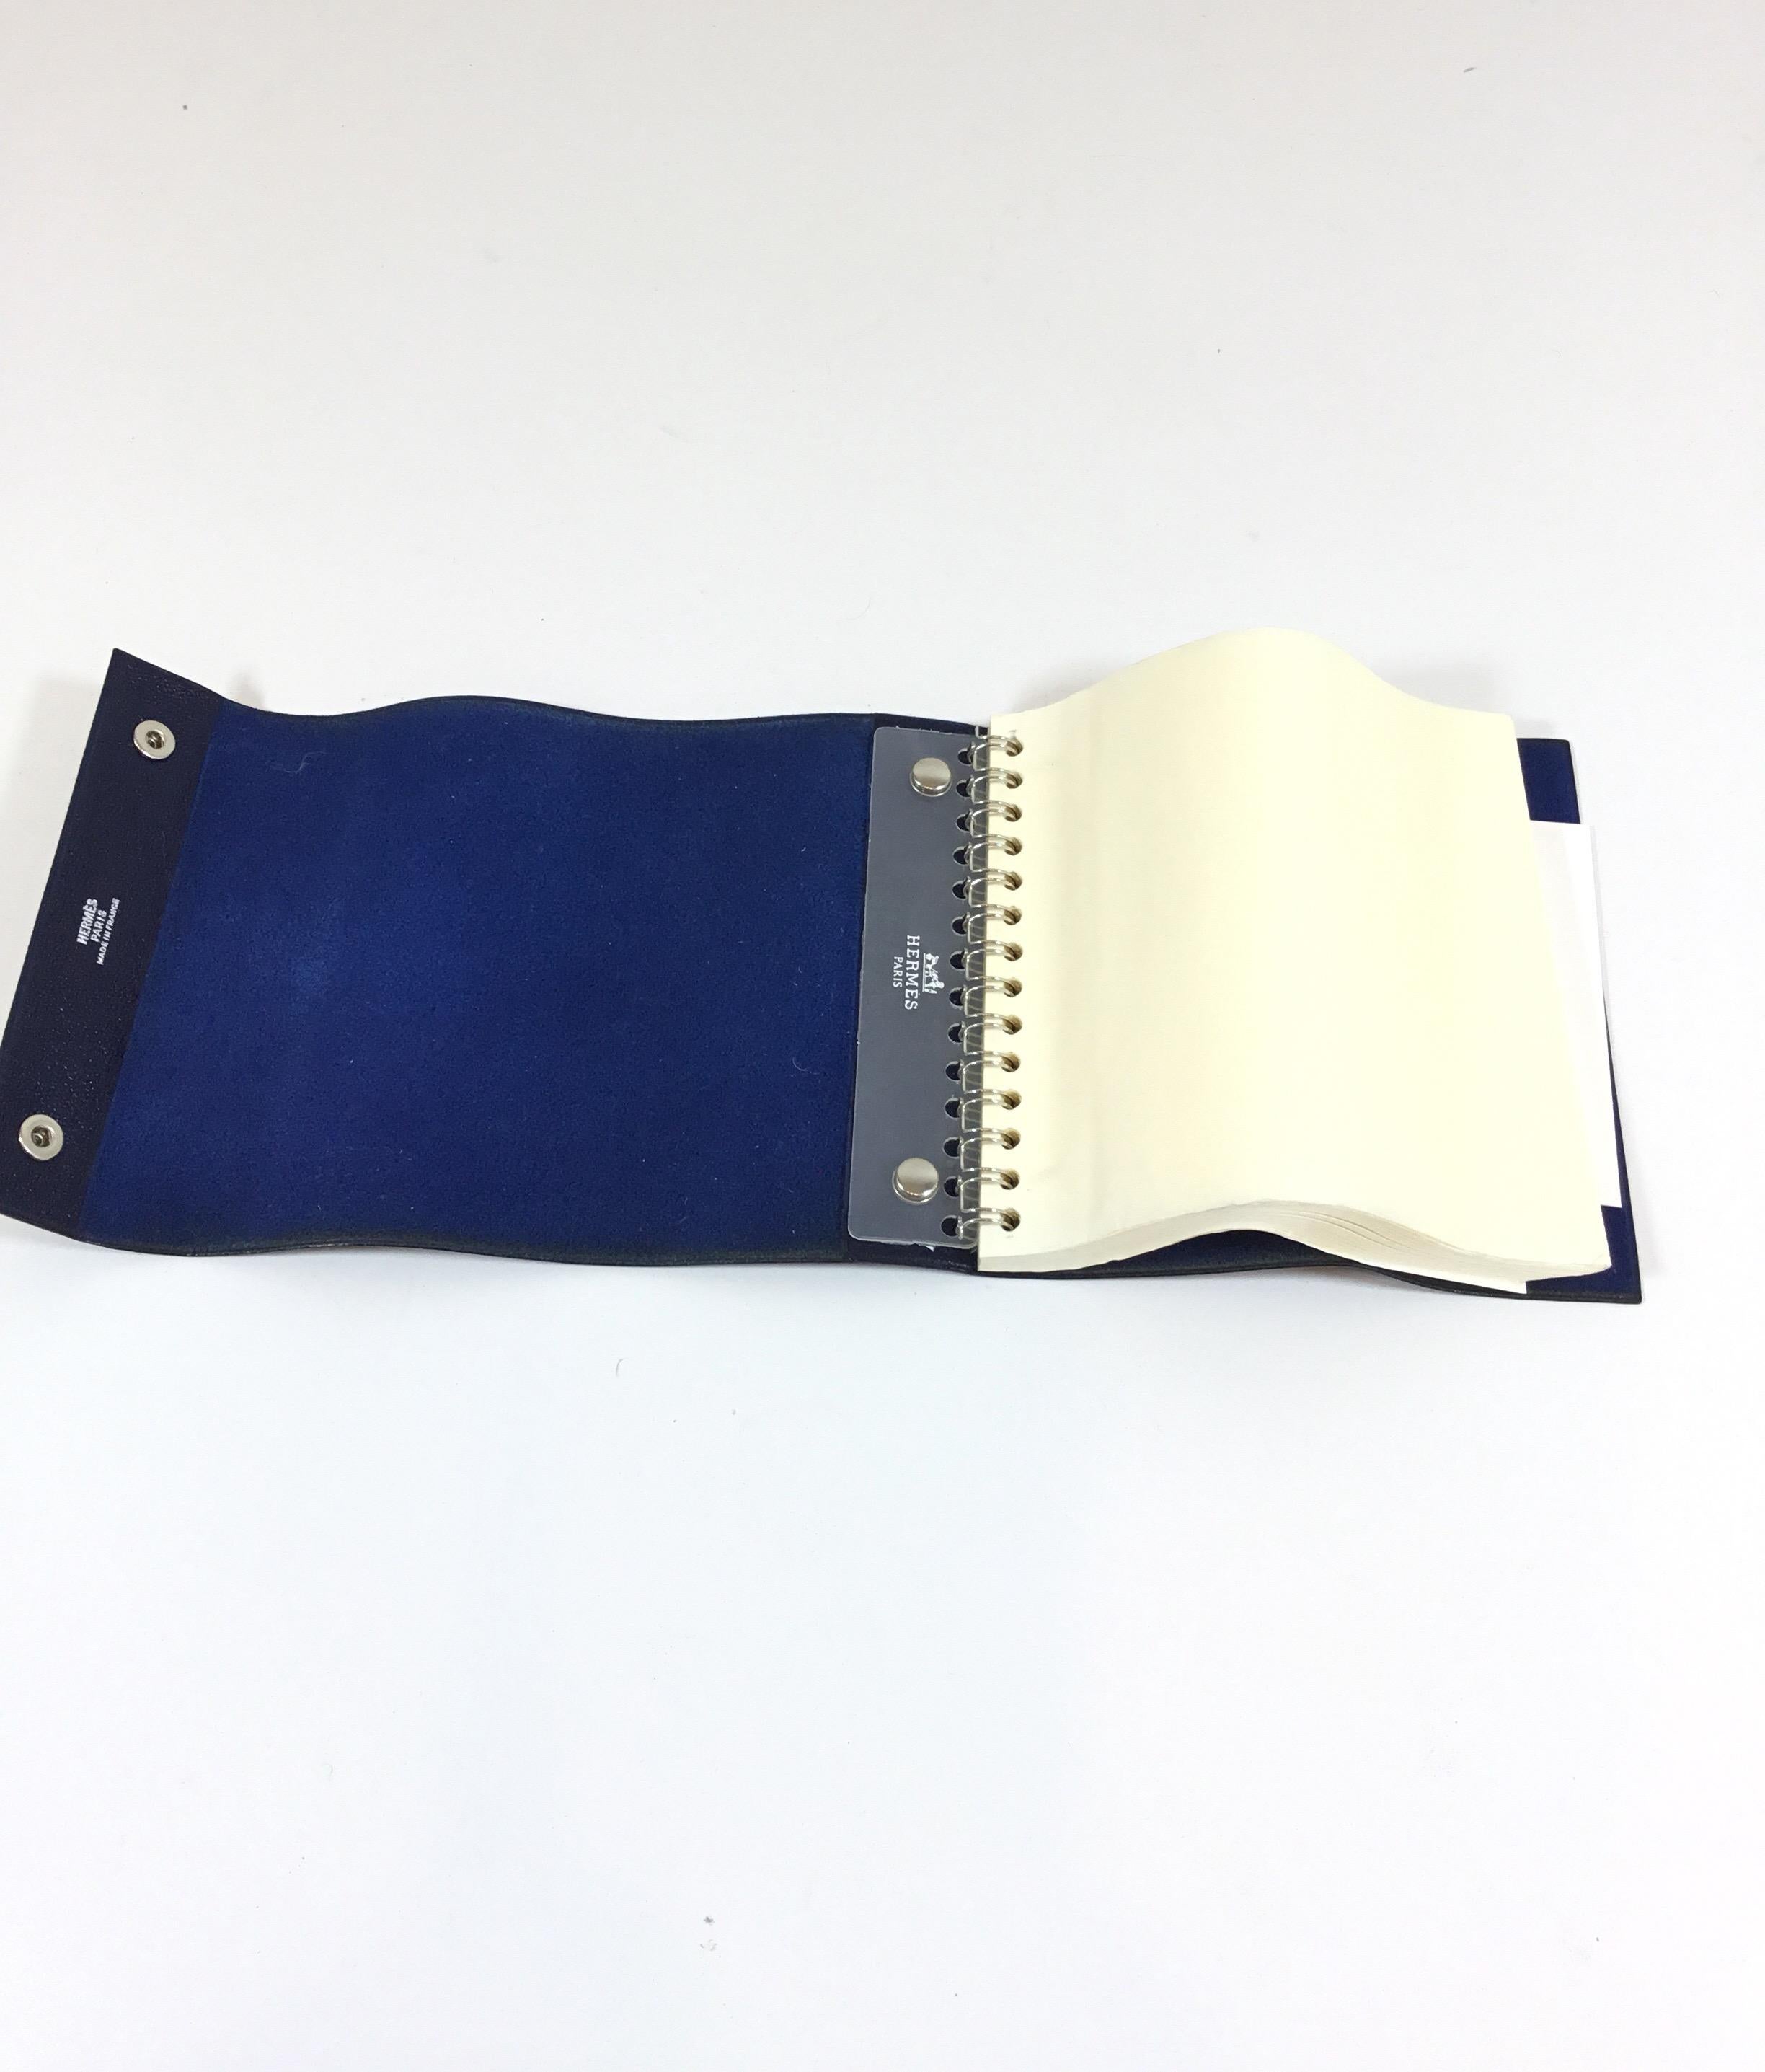 Hermes Paris Leather Notepad, 1996 In Excellent Condition For Sale In Carmel, CA